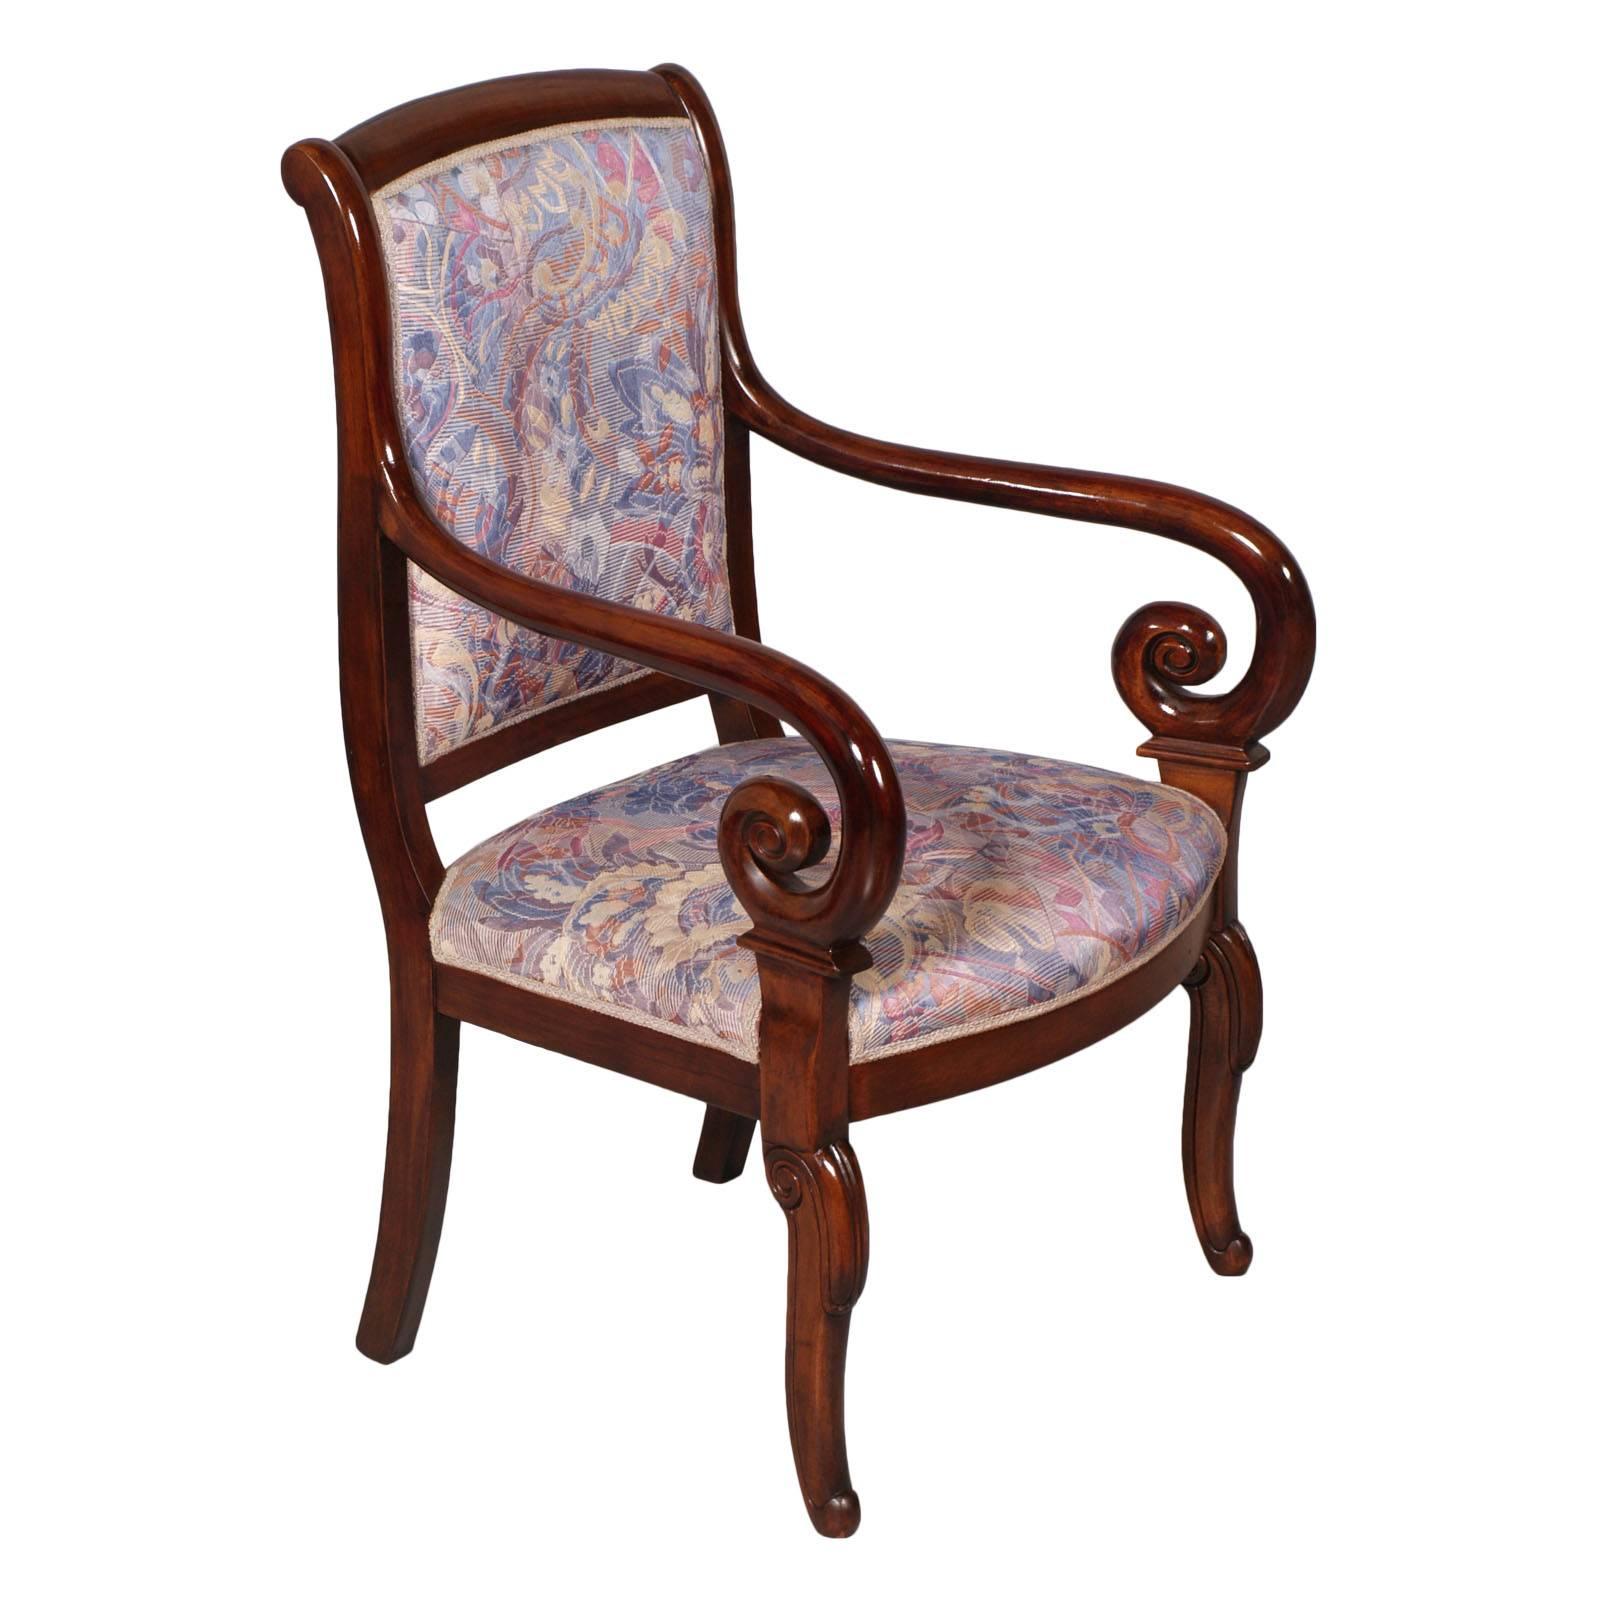 Late 19th Century Franch Empire armchair , in Carved Solid Mahogany